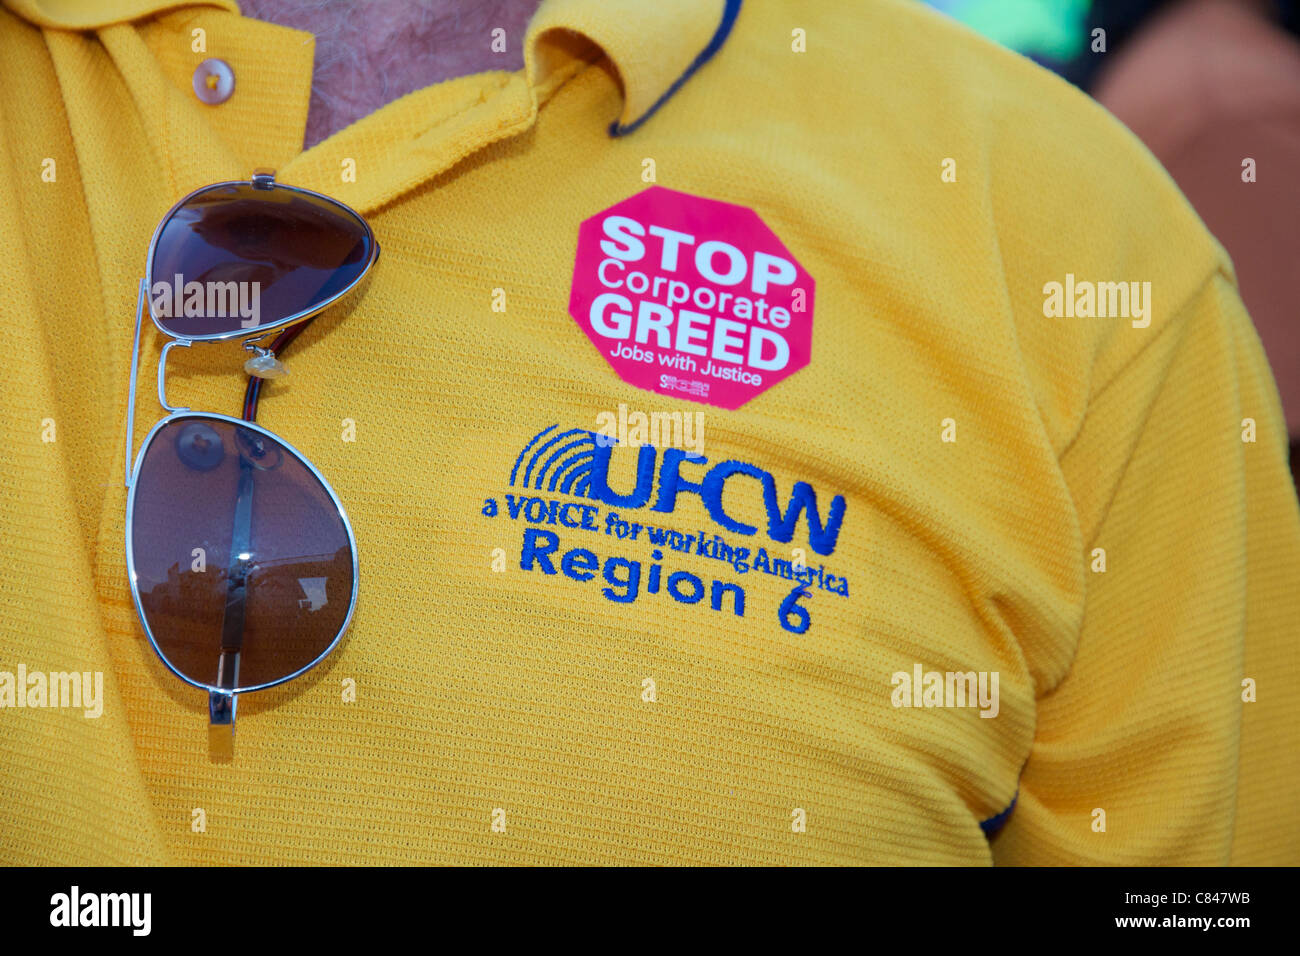 Union protesters shirt, Stop Corporate Greed sticker. Stock Photo